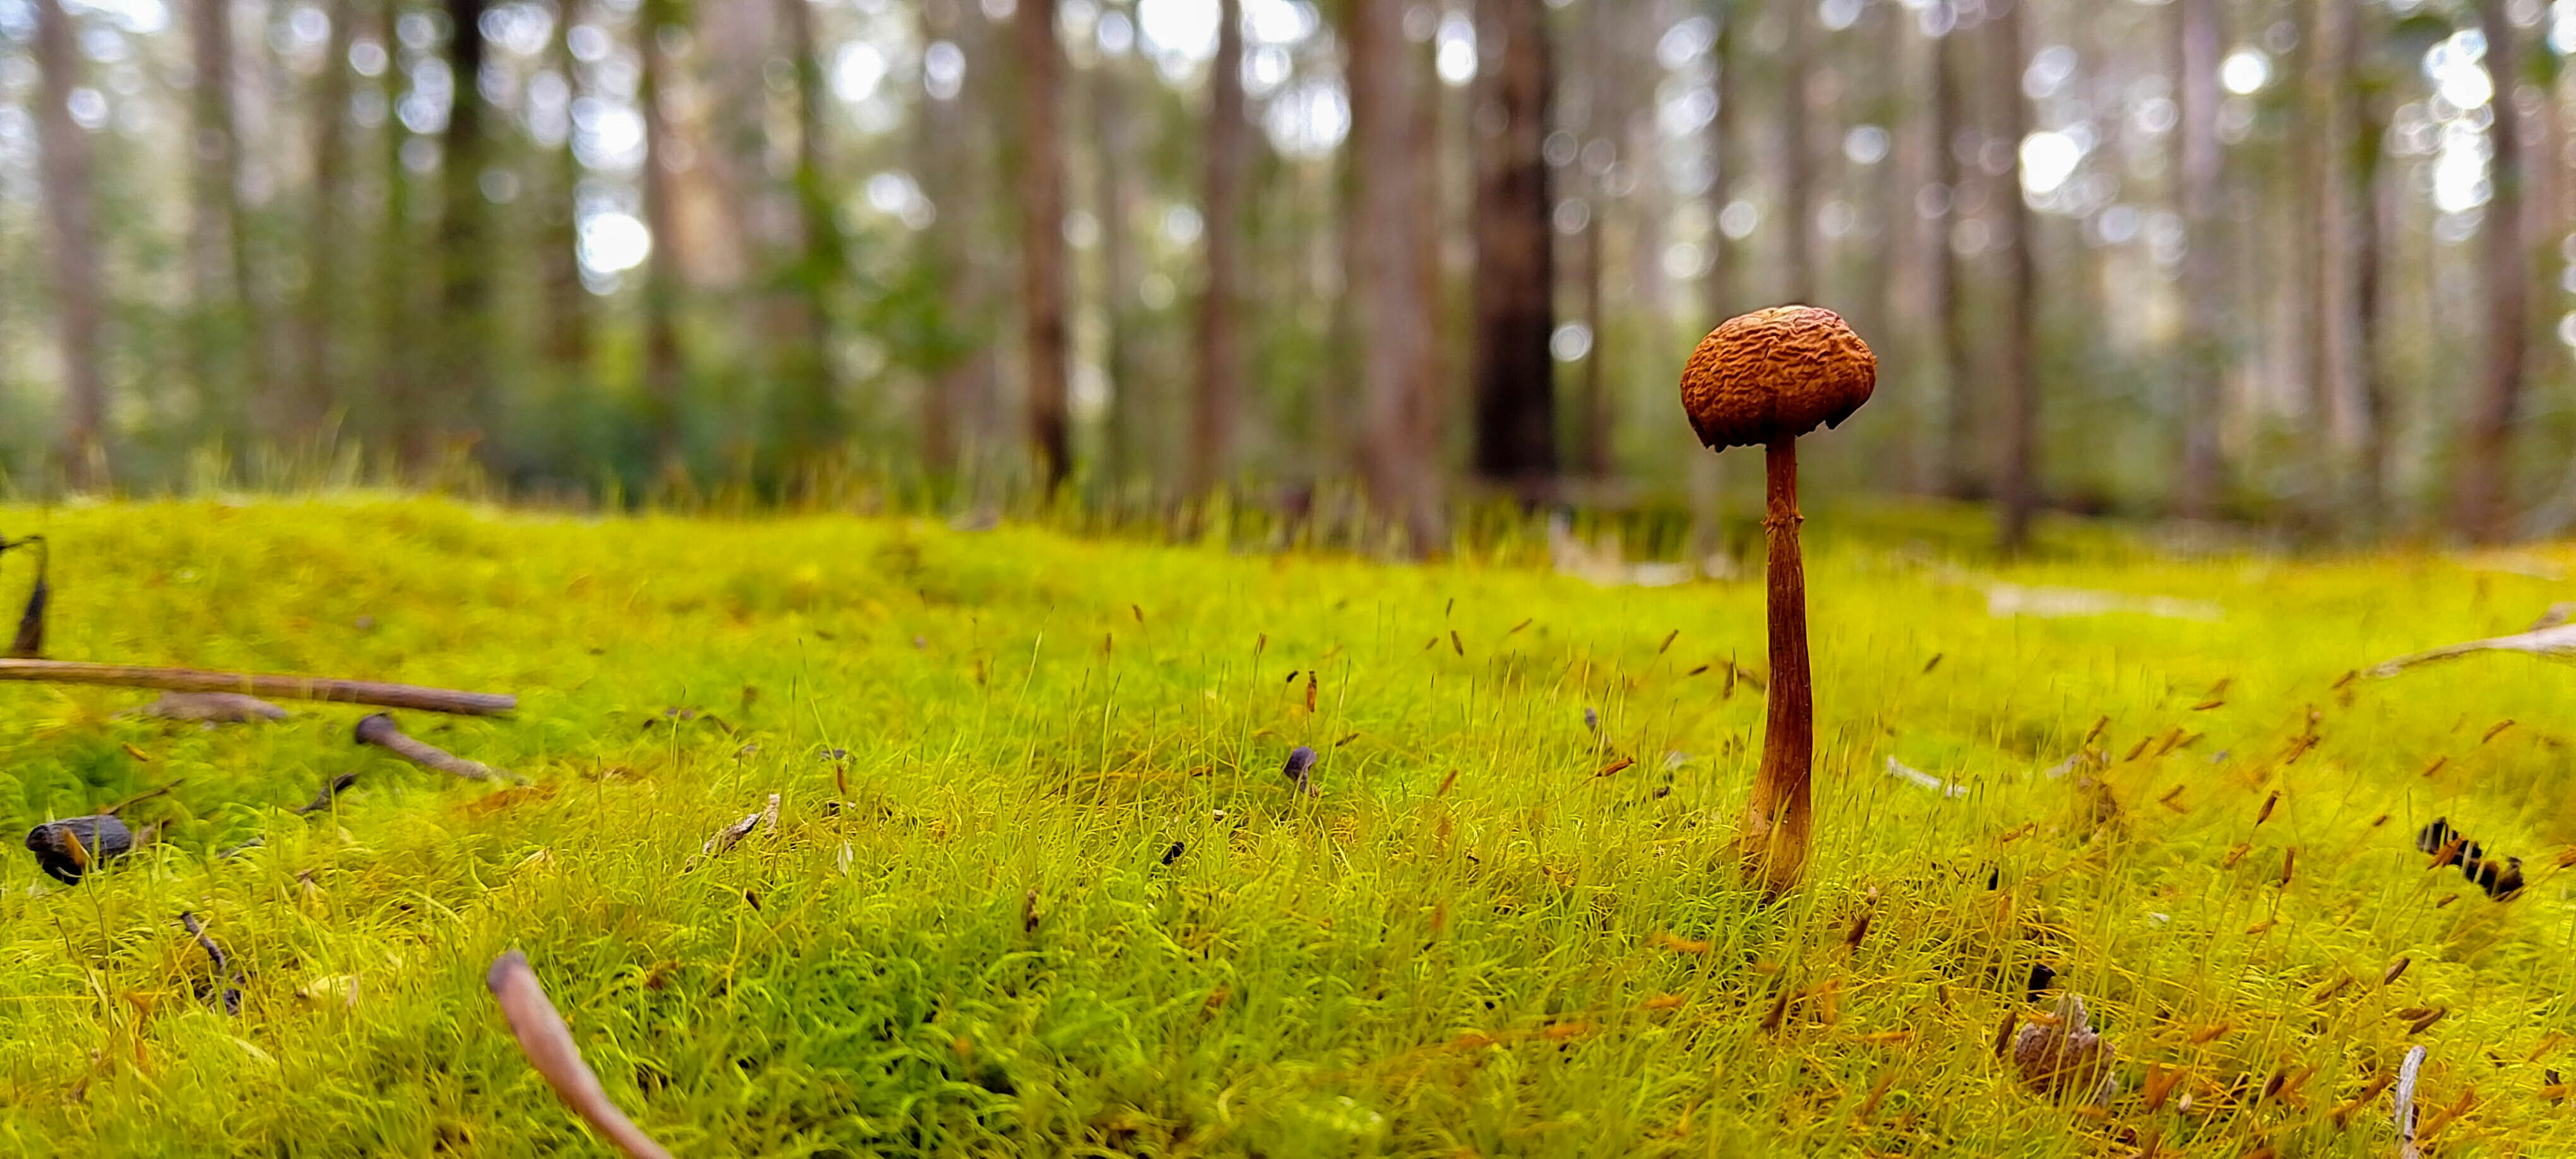 A single mushroom with a textured brown cap and slim stem stands prominently in the center of a vibrant green moss-covered forest floor. The background is a softly blurred view of a forest with tall trees, suggesting a quiet, serene woodland scene.